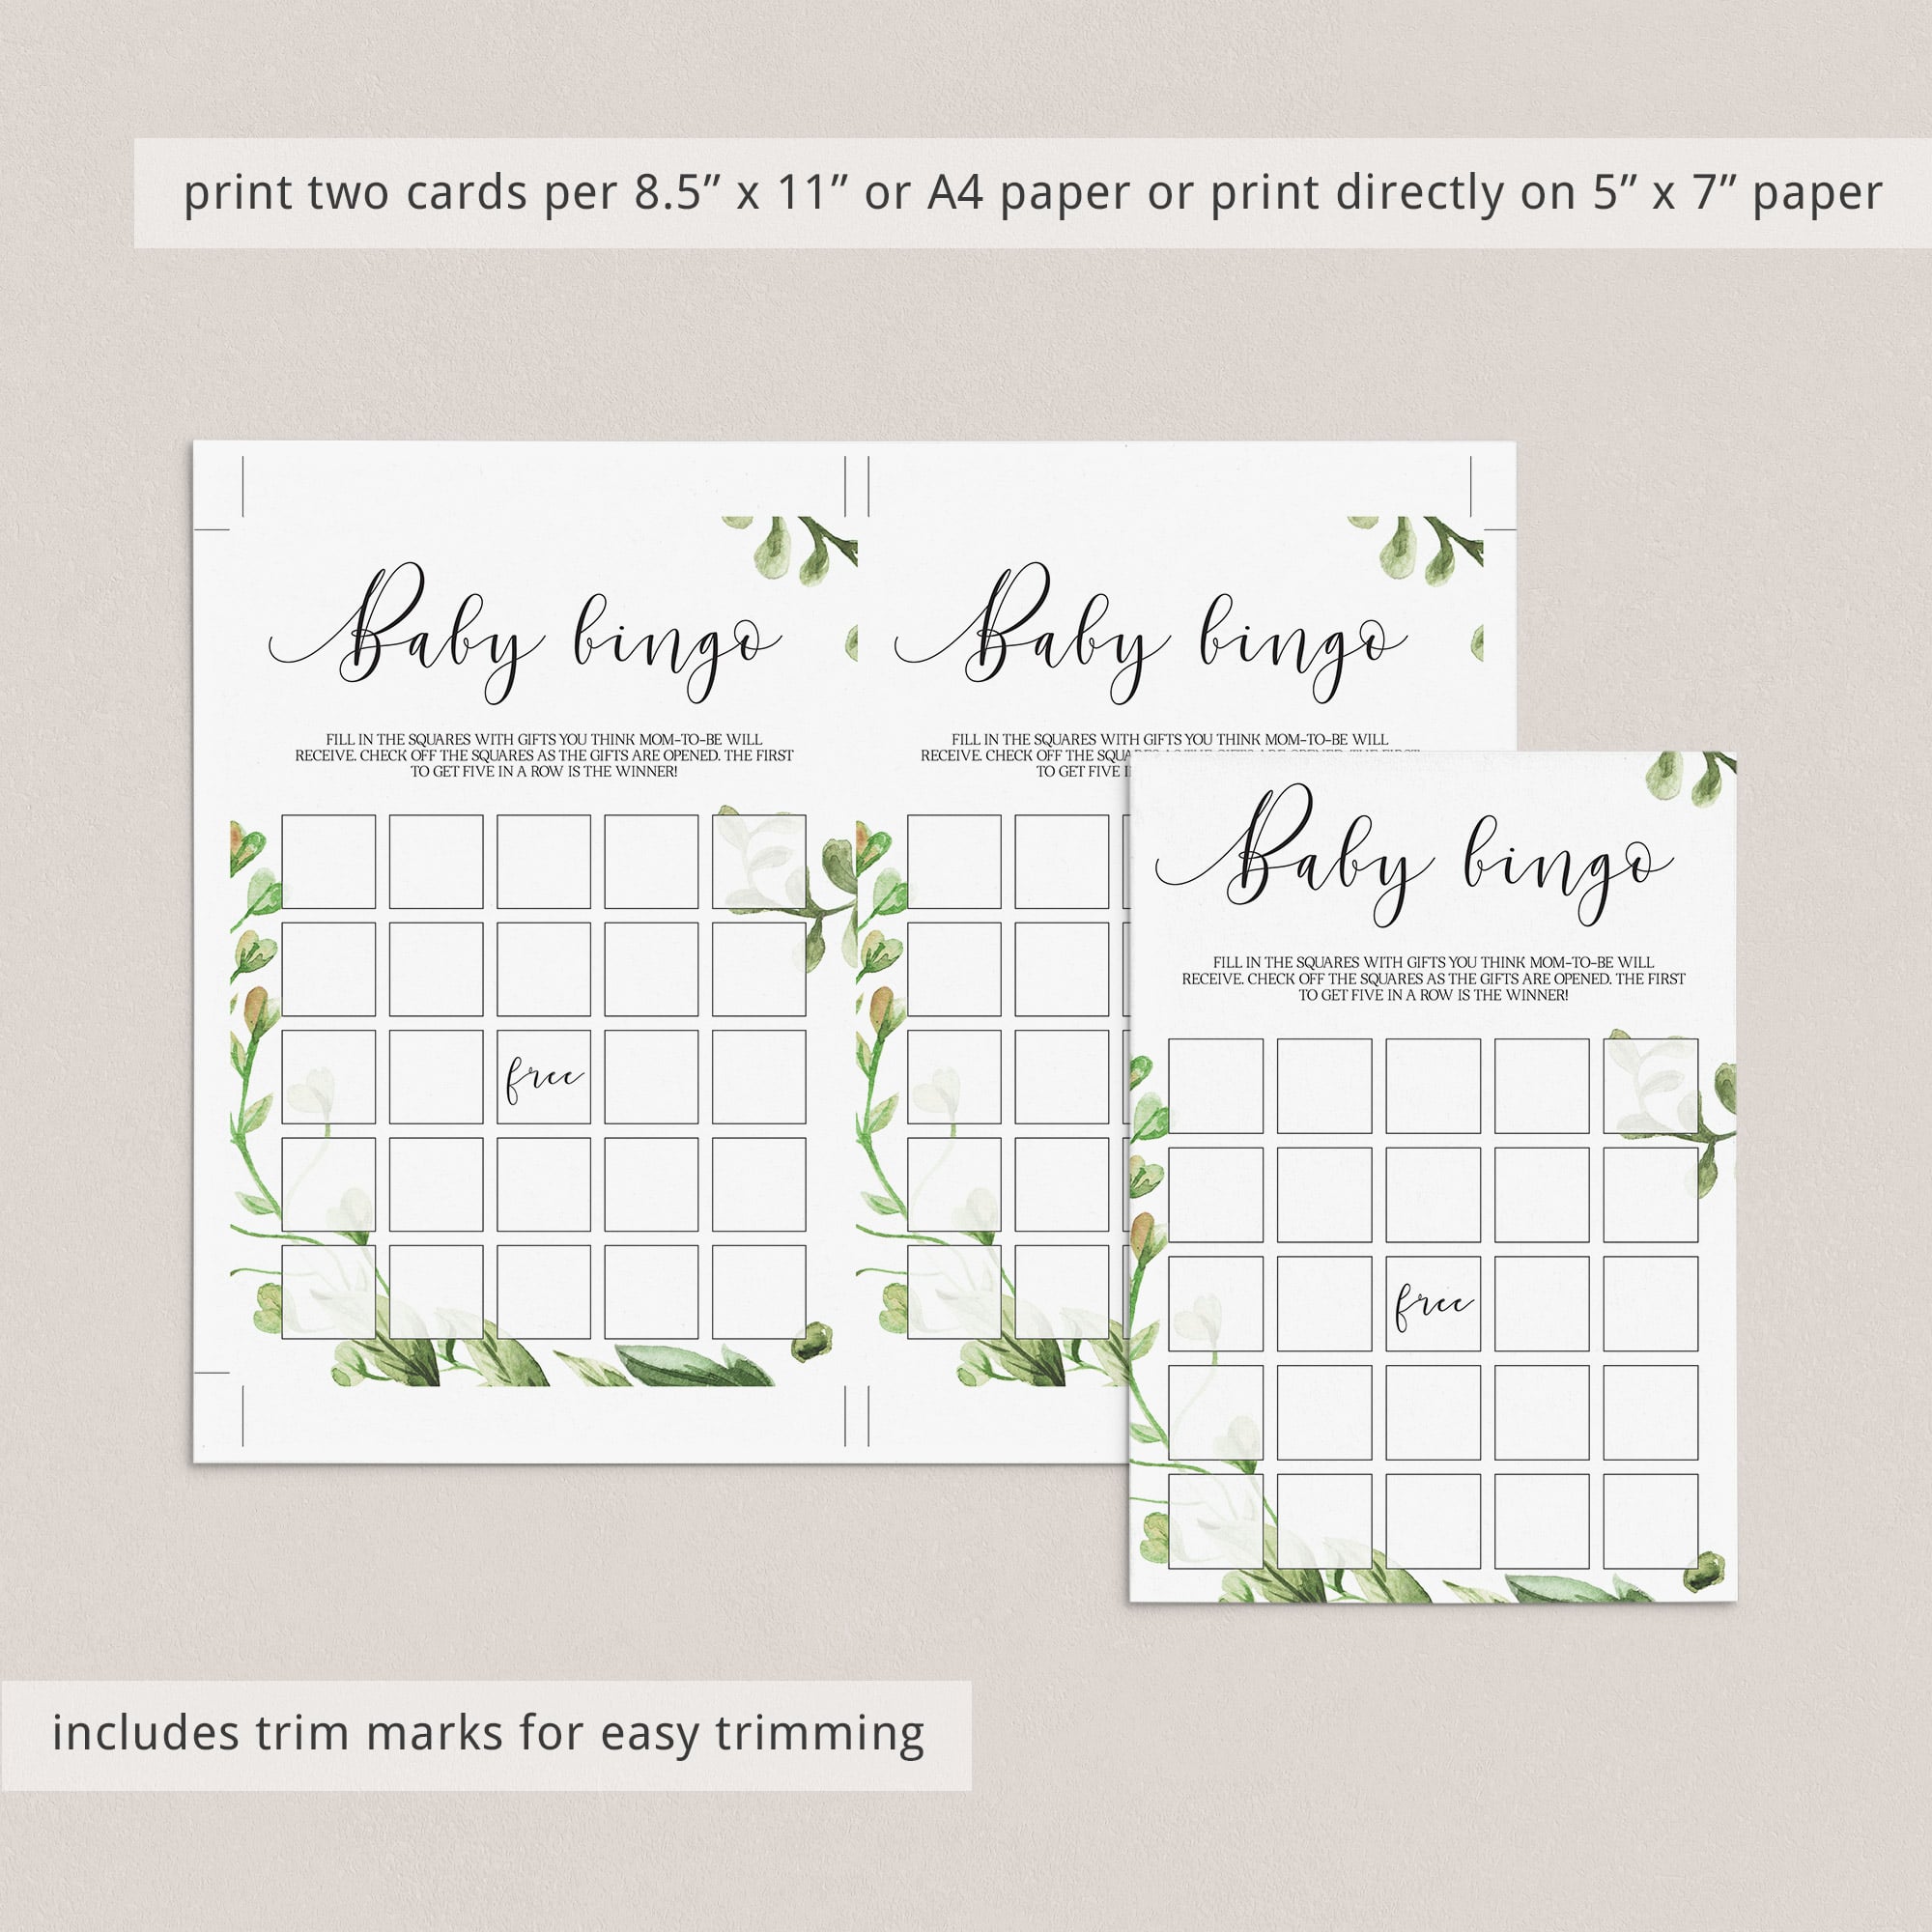 30 prefilled babybingo game cards for gender neutral baby shower party by LittleSizzle